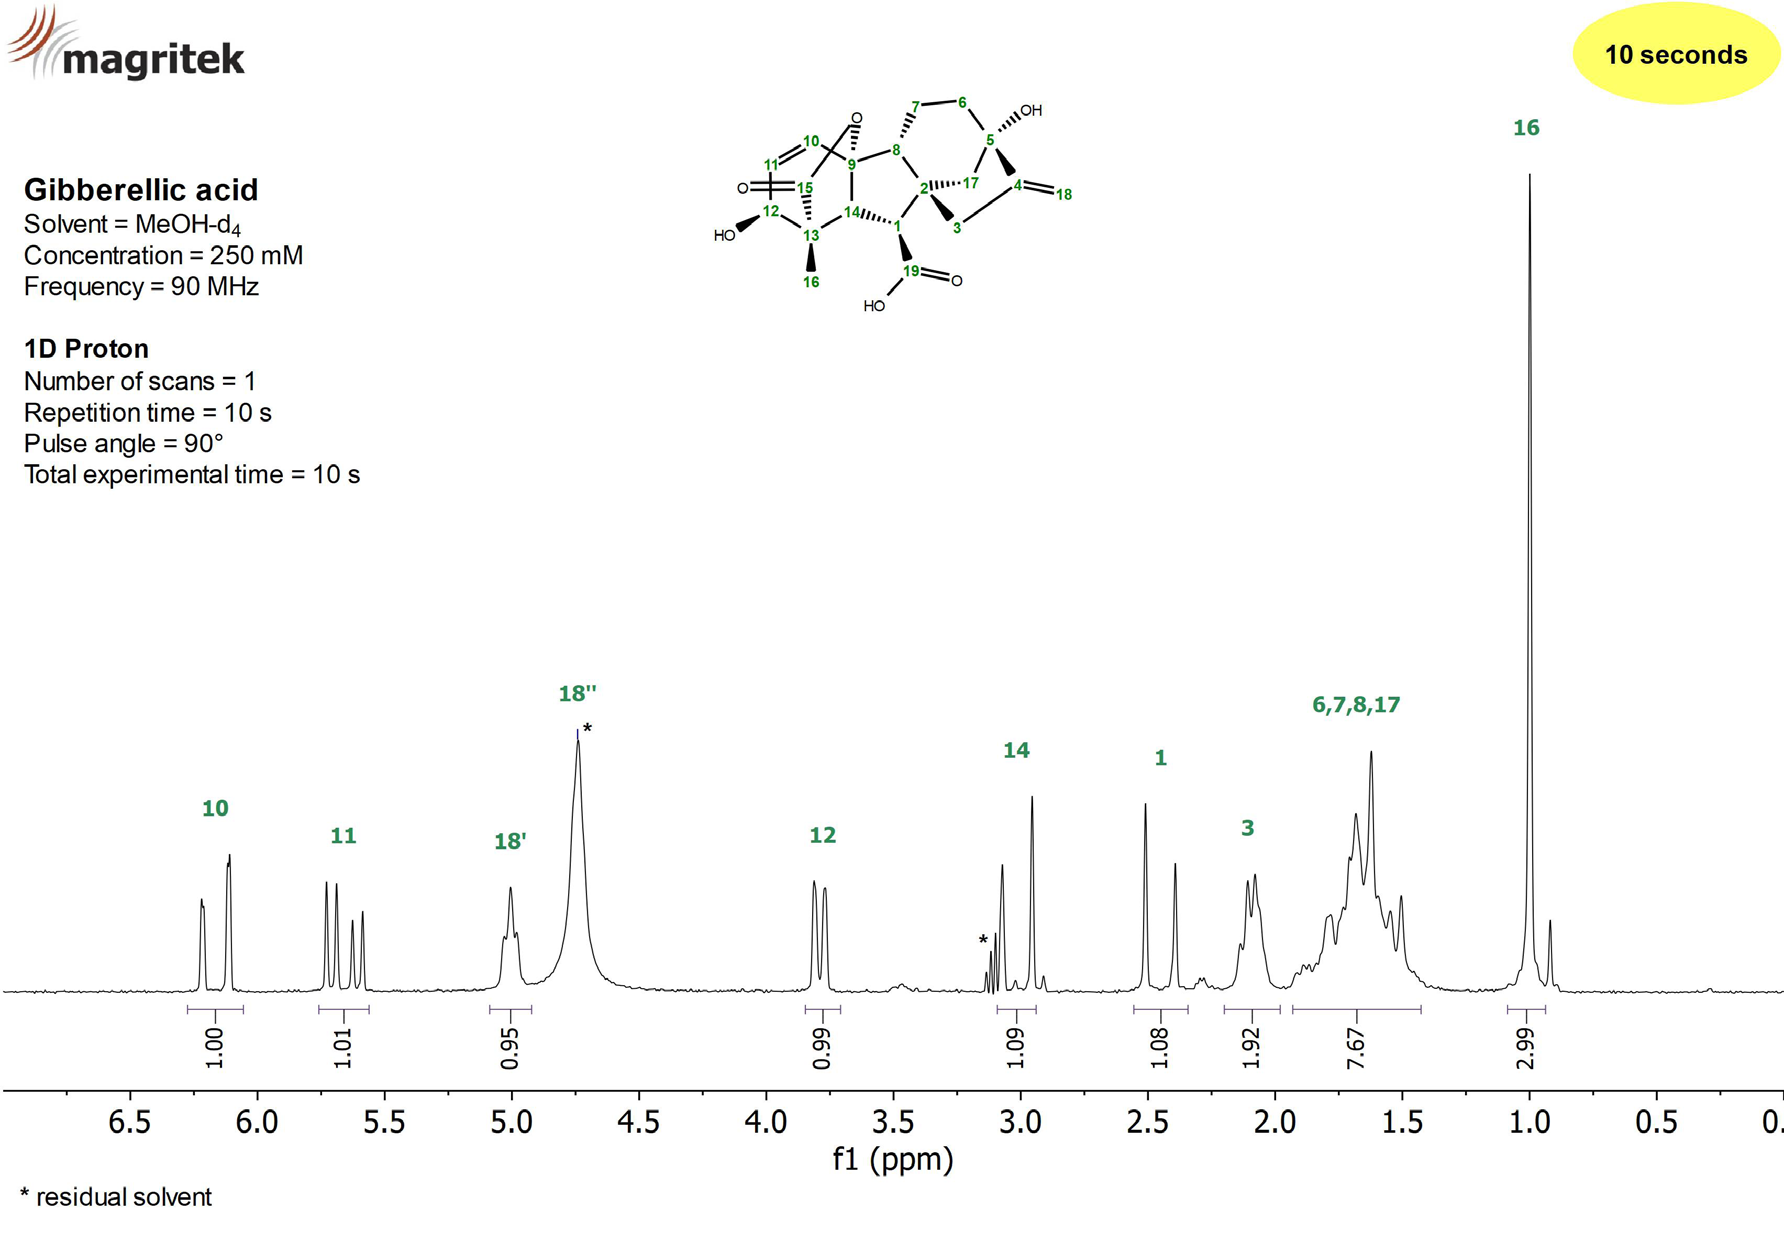 1H NMR spectrum of a 250 mM Gibberellic acid sample in MeOH-d4 measured on a Spinsolve 90 MHz system in a single scan.